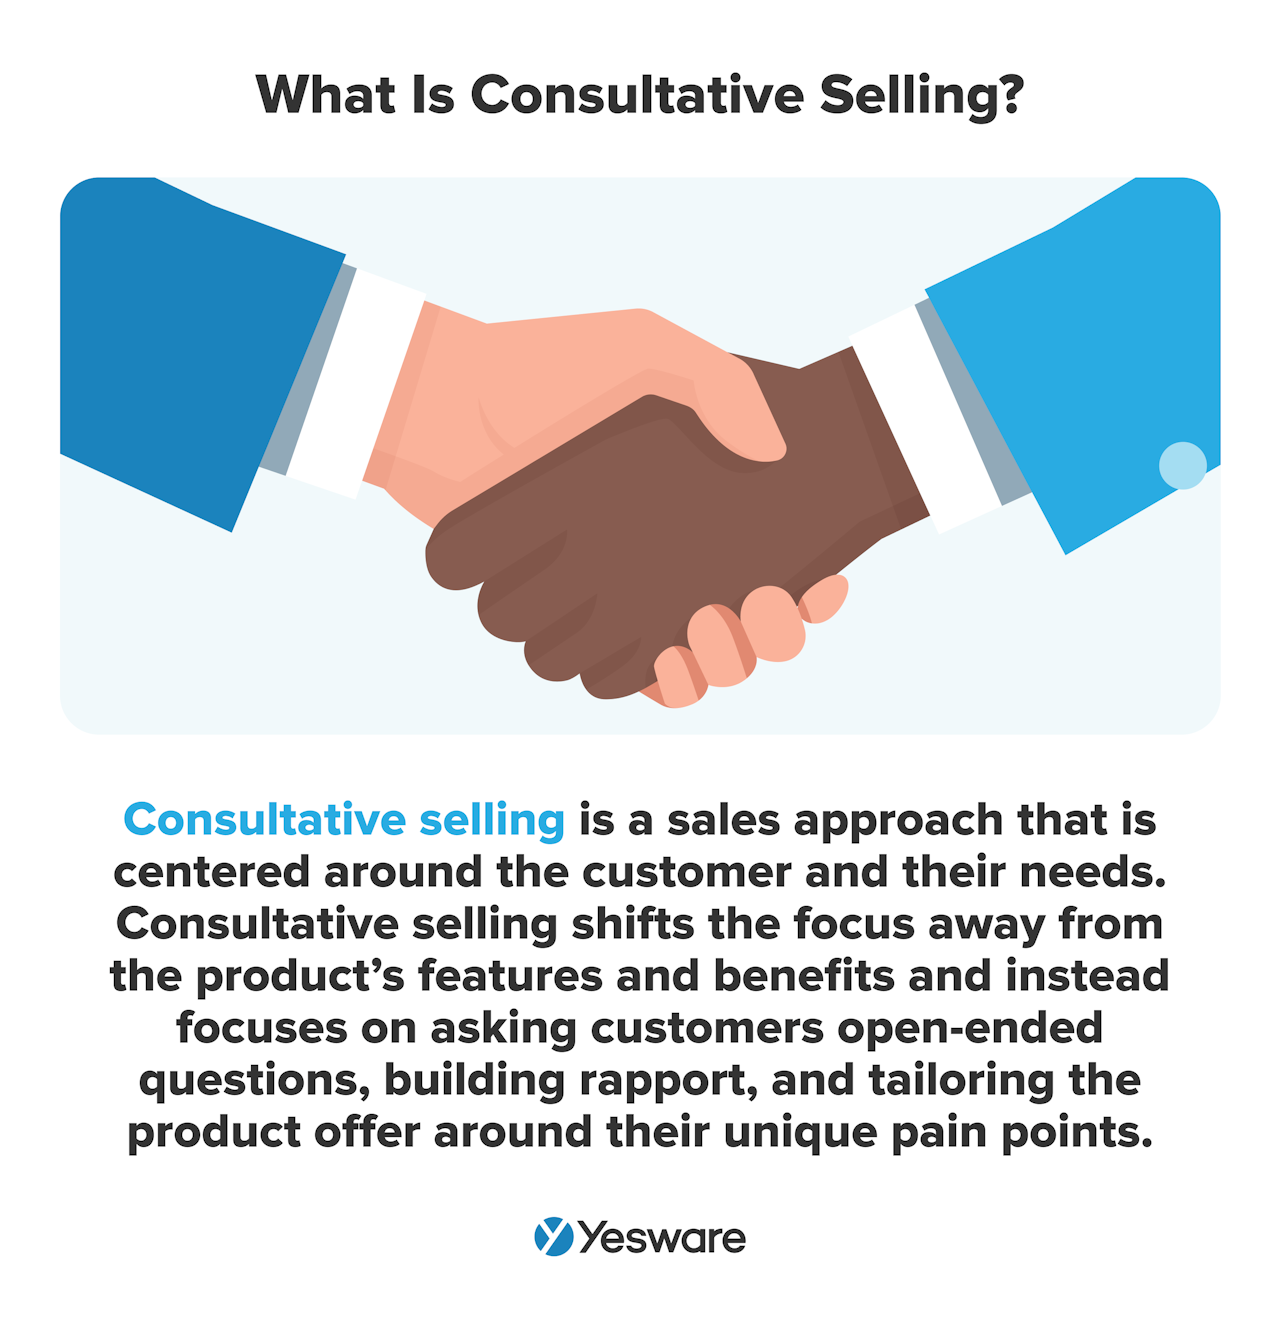 sales approach: consultative selling